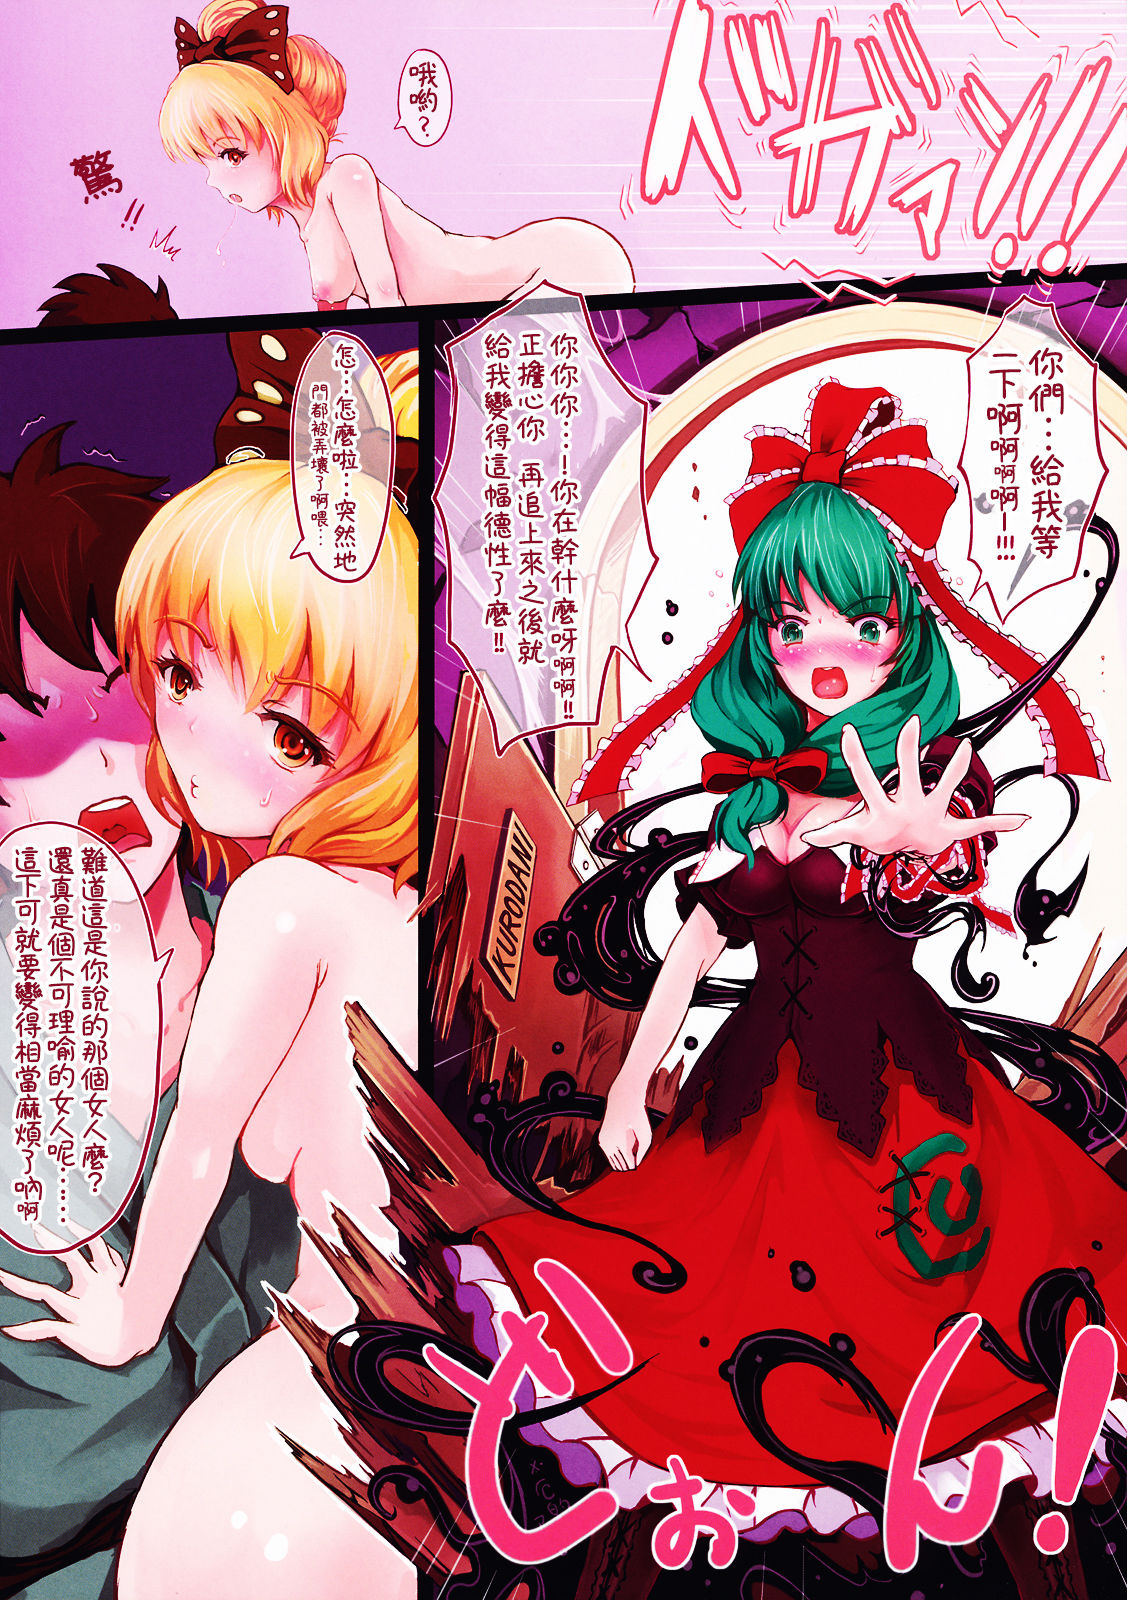 (Reitaisai 9) [dream-mist (sai-go)] TROUBLESOME FEVER (Touhou Project) [Chinese] [oo君の個人漢化] (例大祭9) [dream-mist (sai-go)] TROUBLESOME FEVER (東方Project) [中国翻訳]